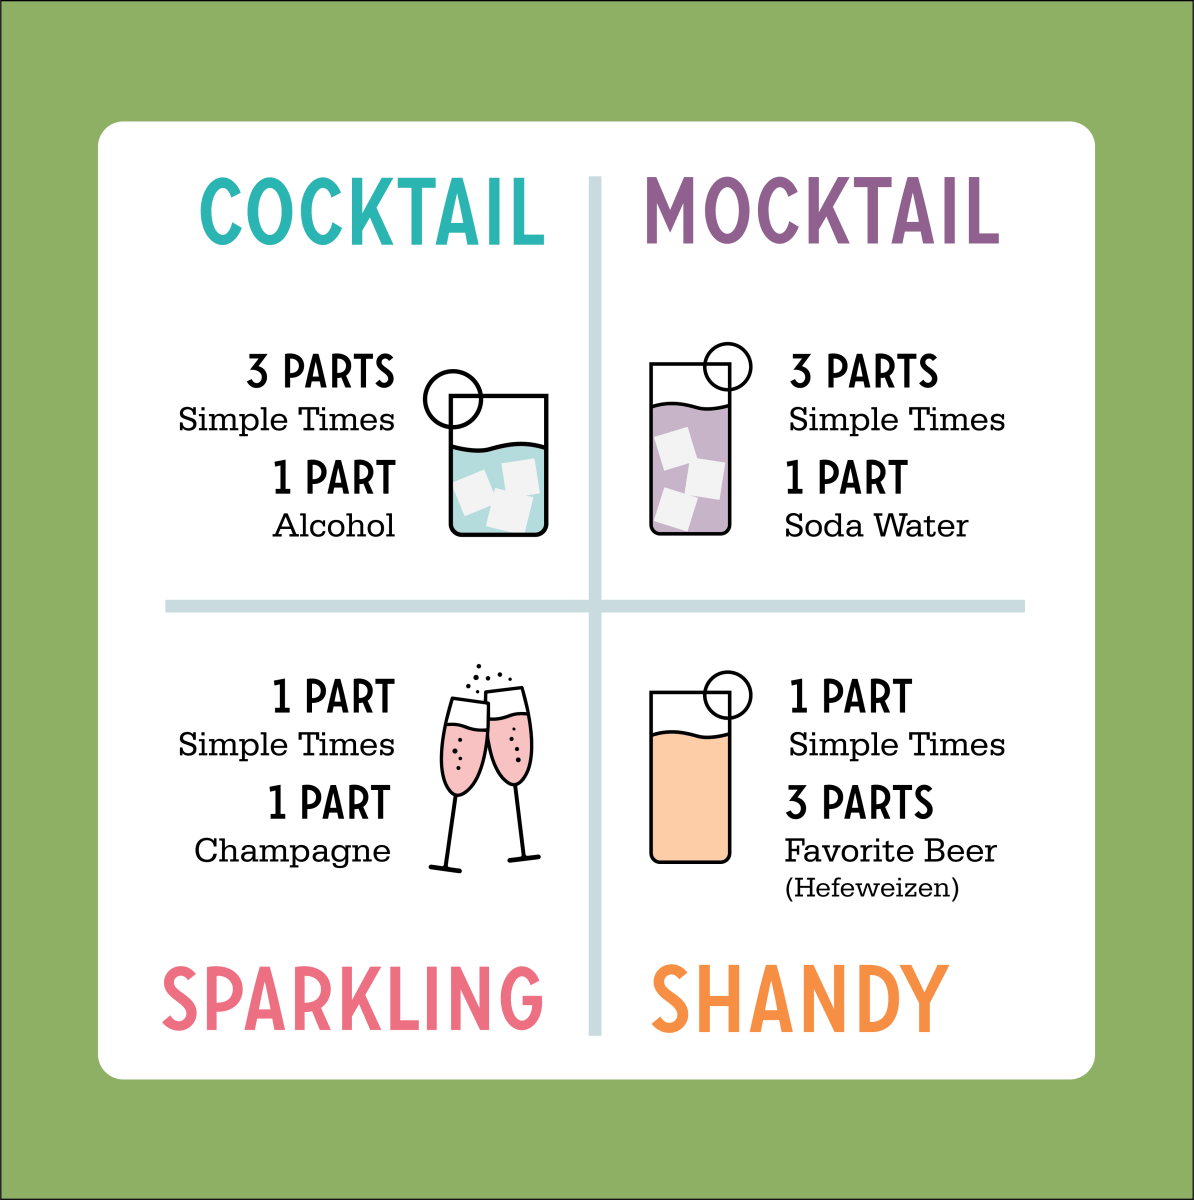 Cocktail Mixers - Alcohol Mixers - Simple Times Mixers - Strawberry Sage Margarita